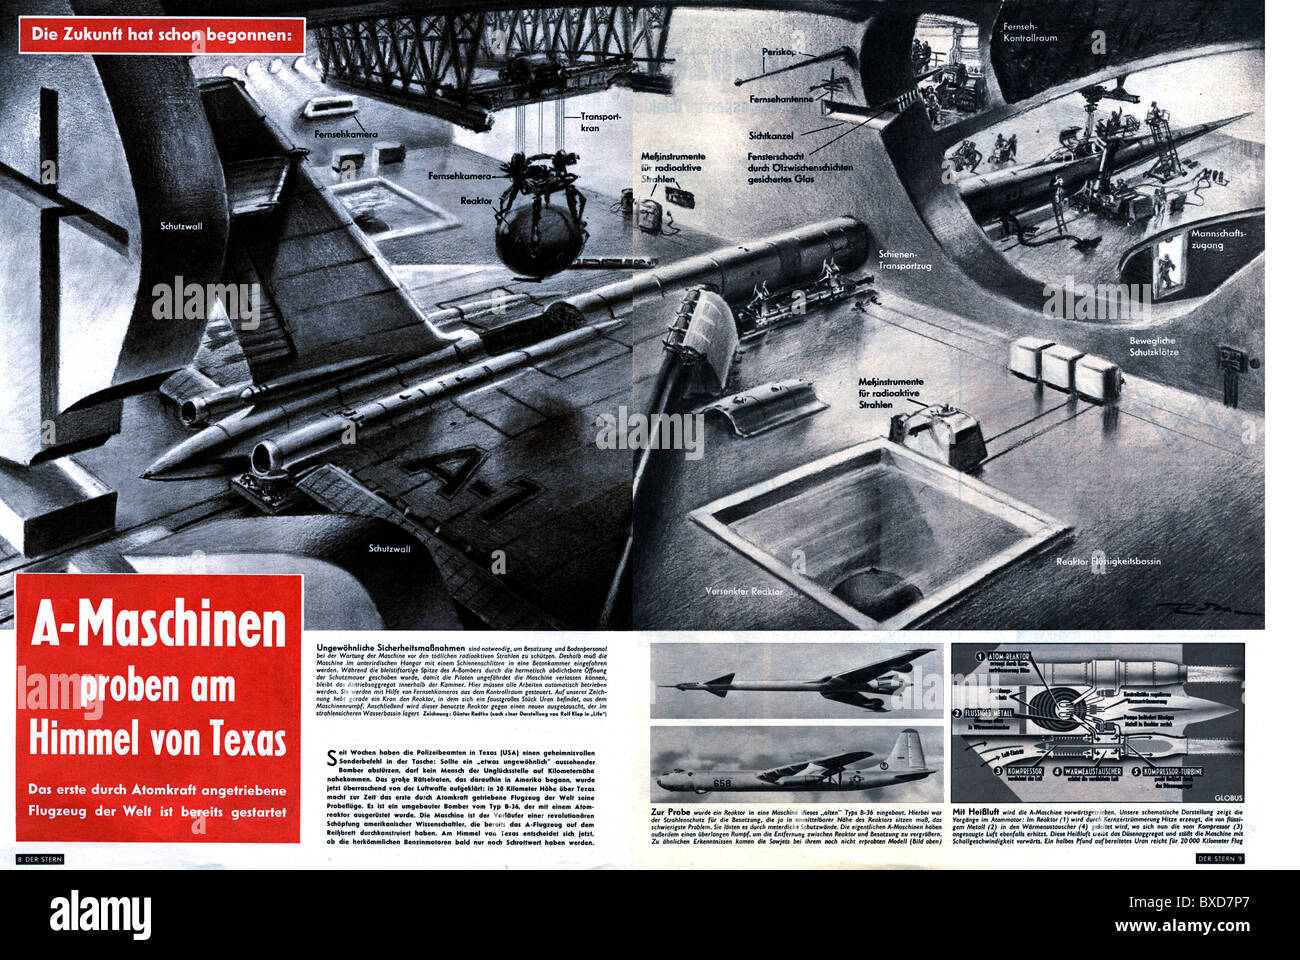 journals / magazines, 1956, 'Der Stern', volume 9, number 3, inside, 'A-Maschinen proben am Himmel von Texas' (A-machines flying on Texas sky), 22.1.1956, Additional-Rights-Clearences-Not Available Stock Photo